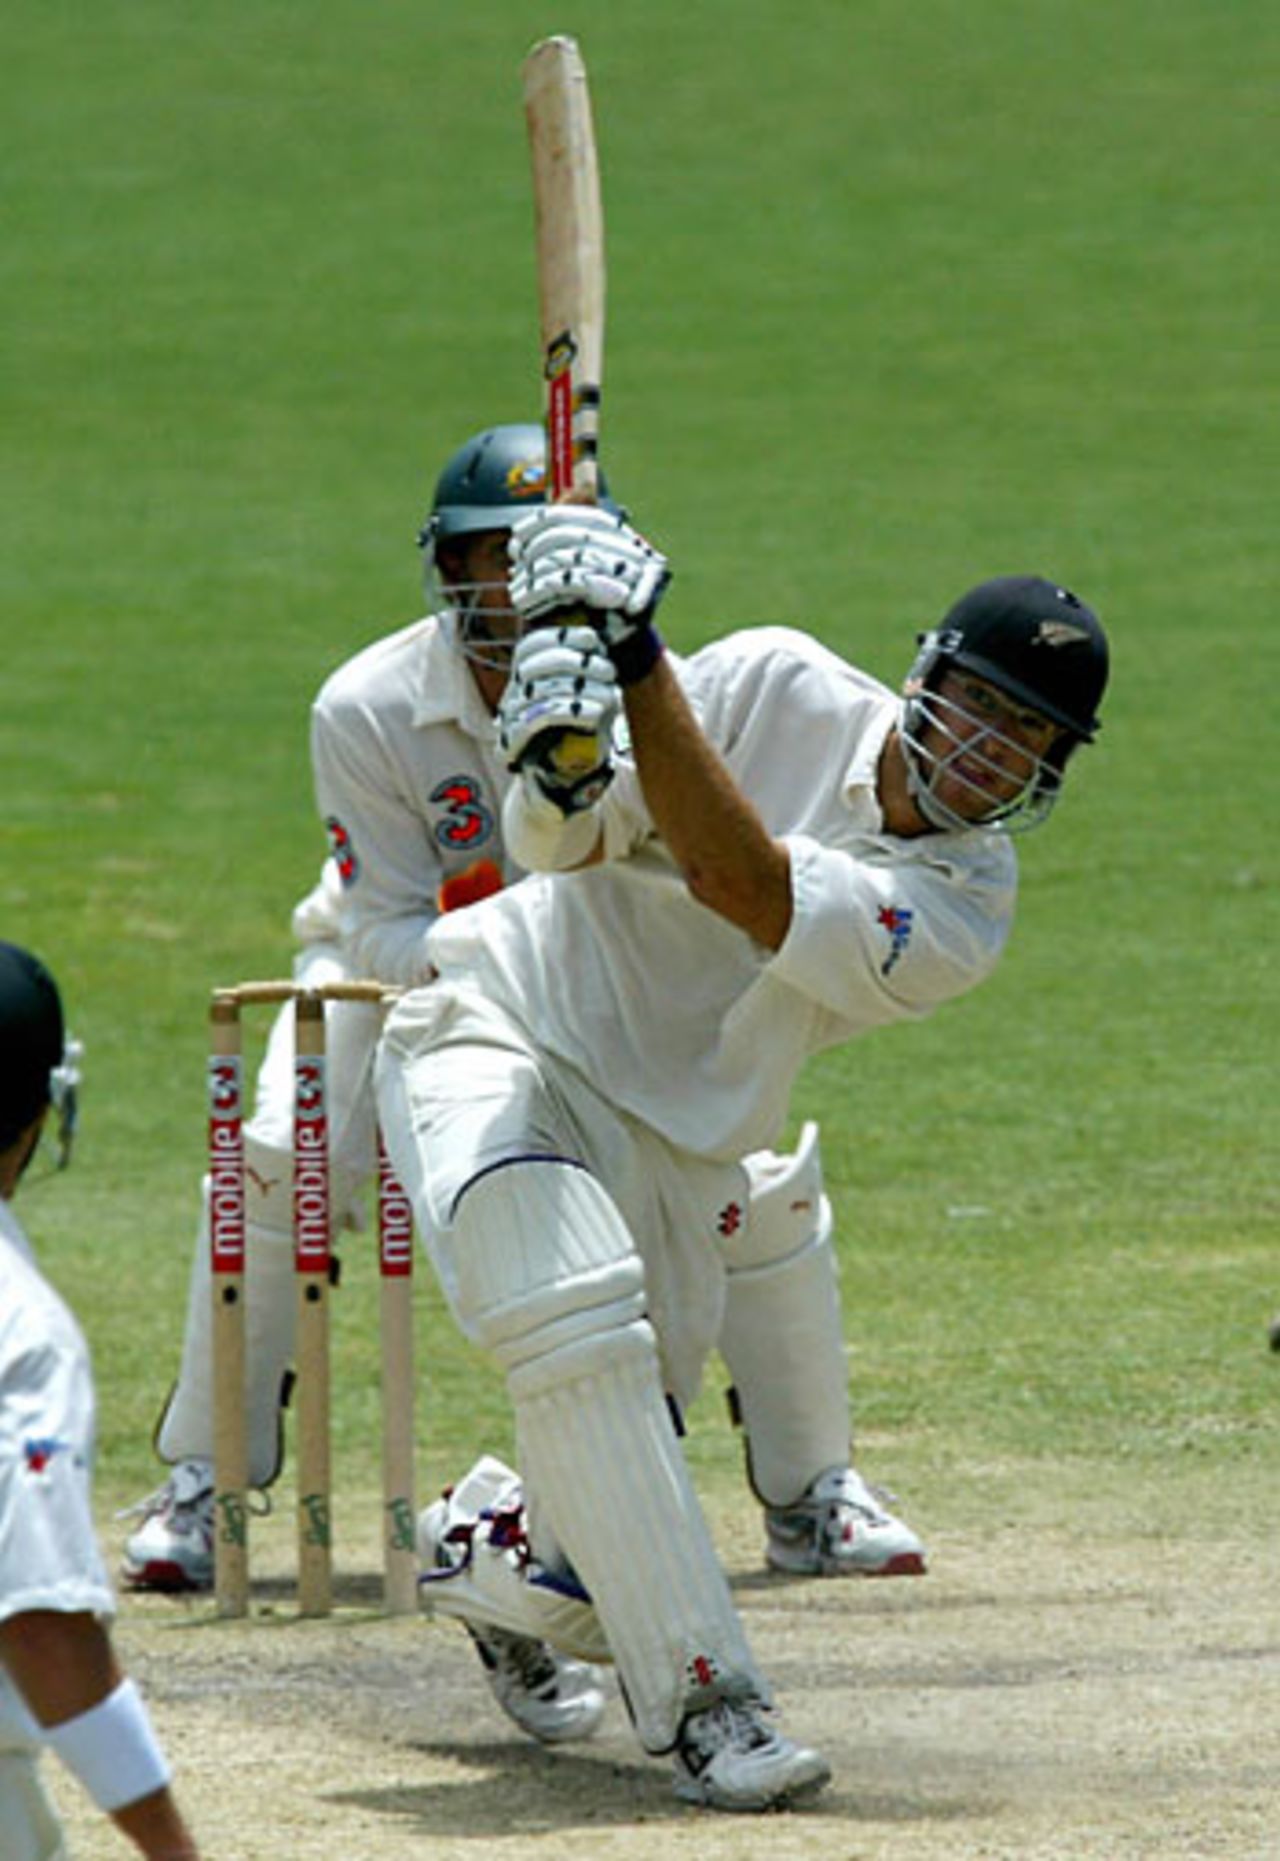 Daniel Vettori hits out on his way to 59, Australia v New Zealand, 2nd Test, Adelaide, November 30, 2004